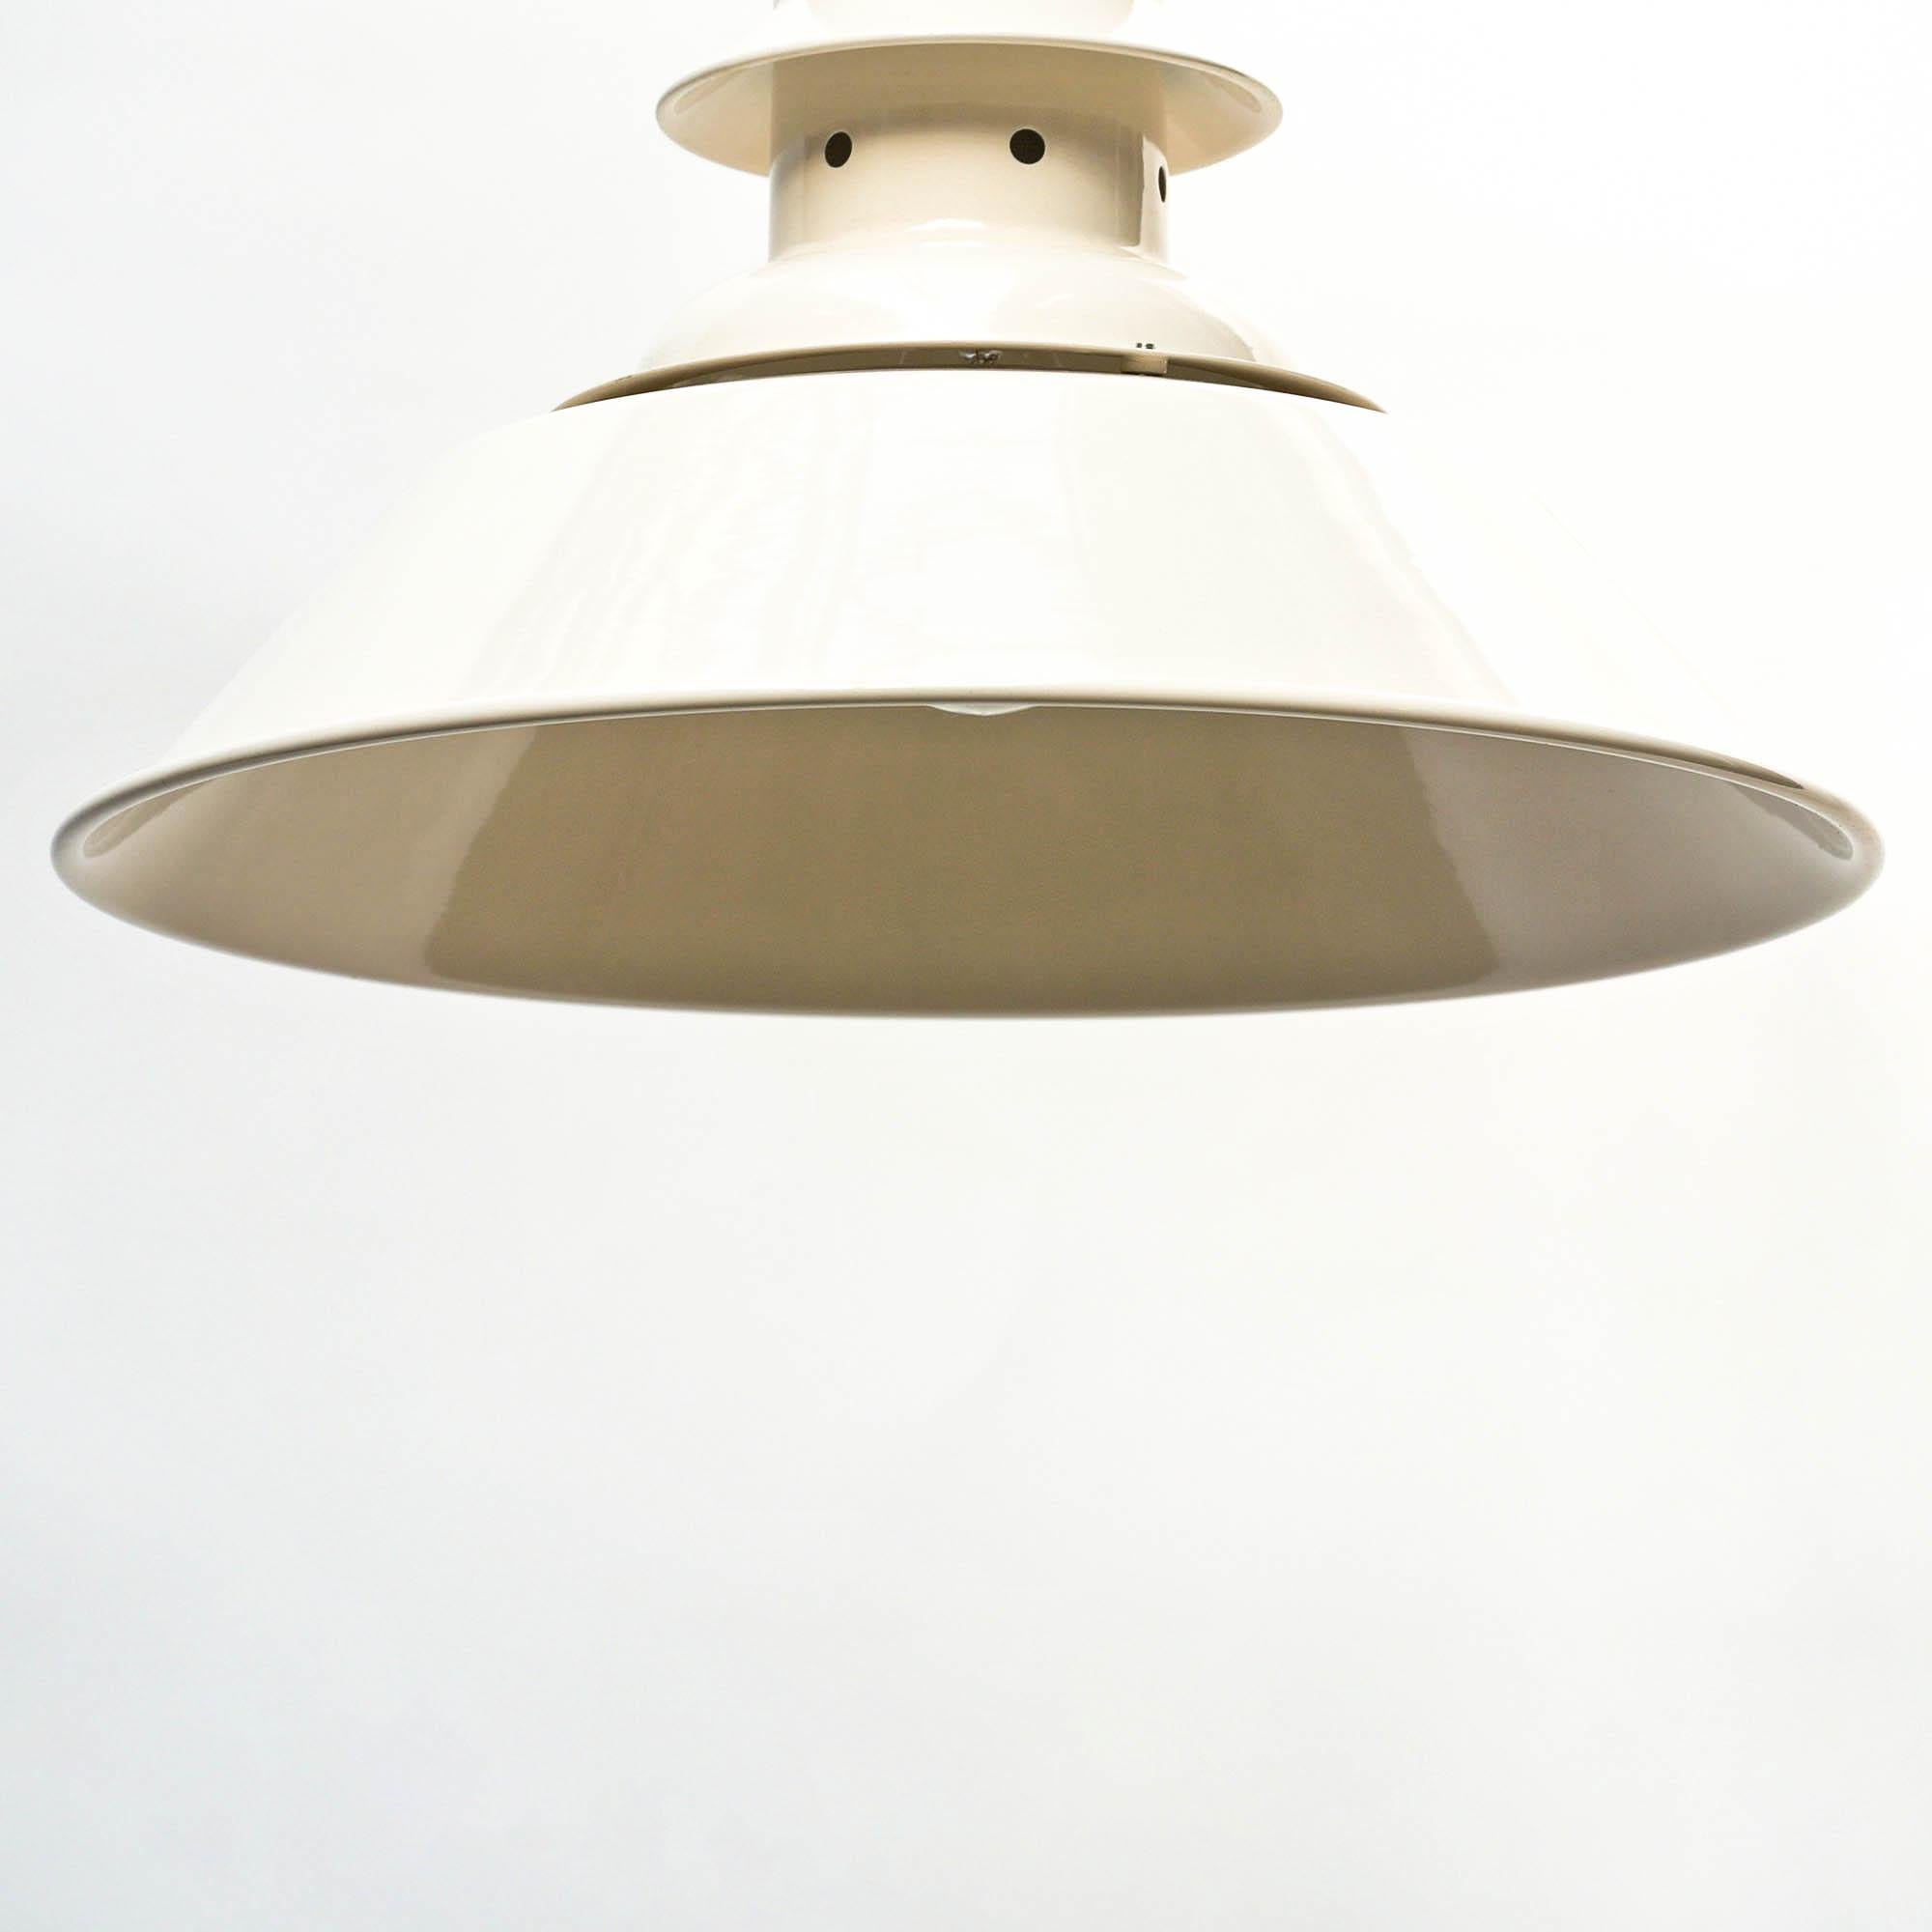 Industrial Cream Ceiling Light with Perforated Neck, White Cream, France, circa 1950